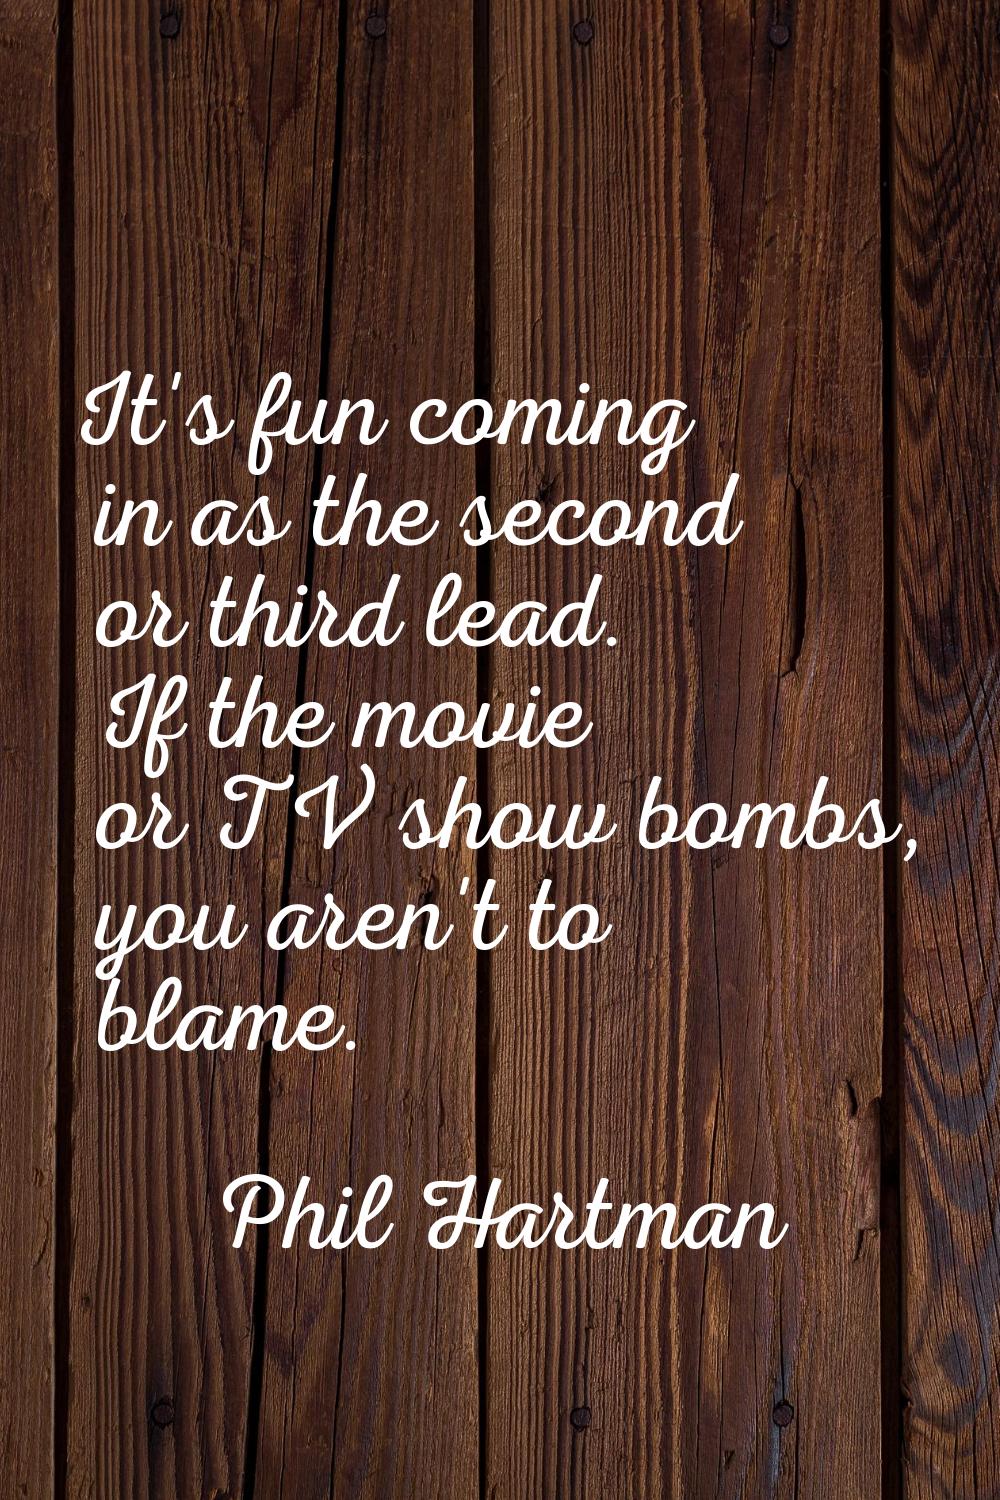 It's fun coming in as the second or third lead. If the movie or TV show bombs, you aren't to blame.